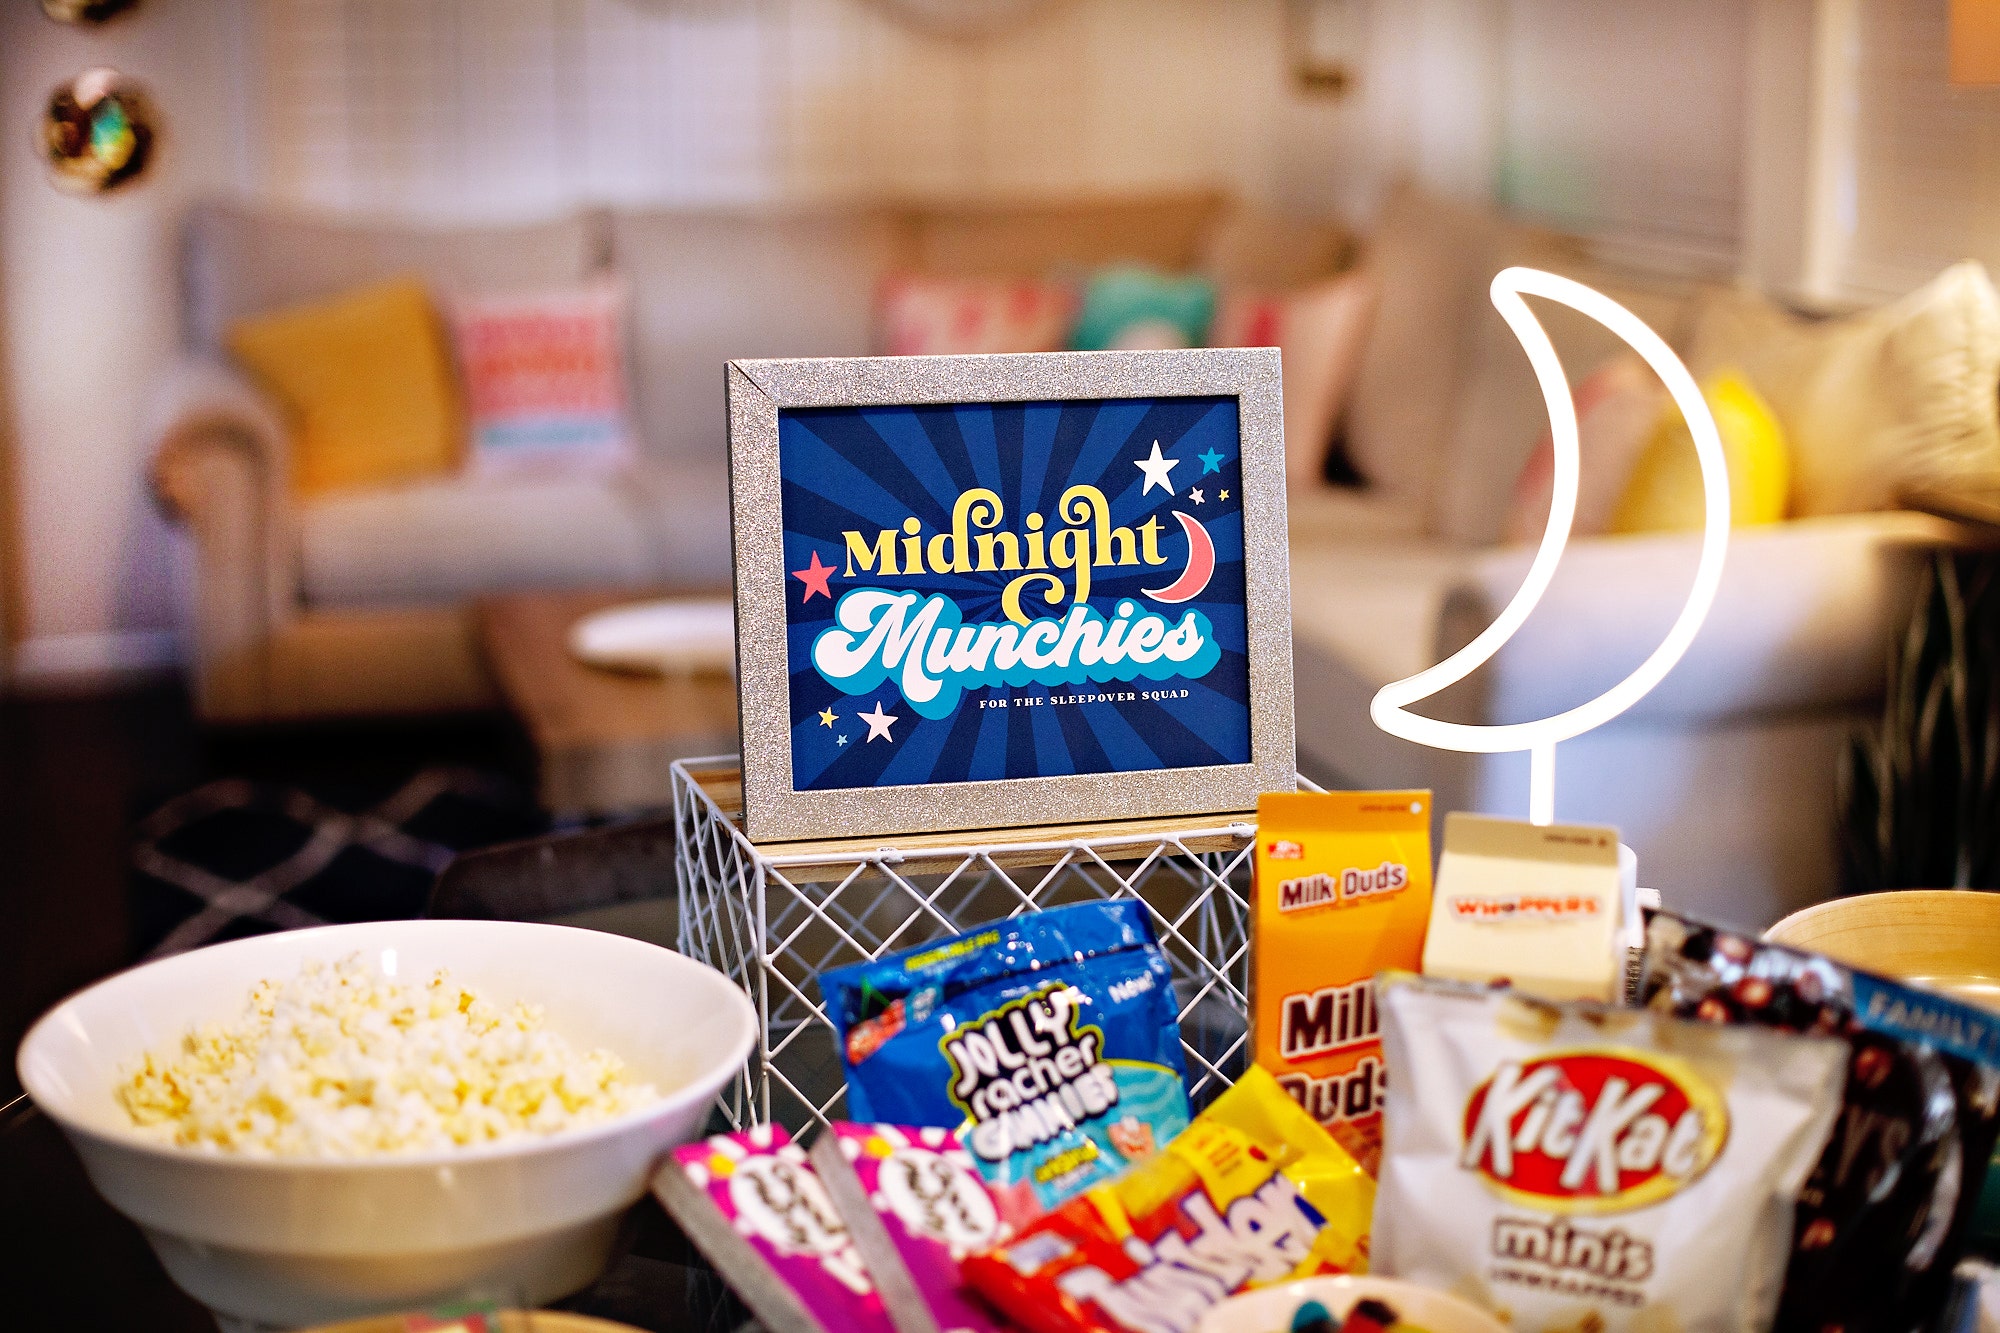 DIY movie theater snack stand